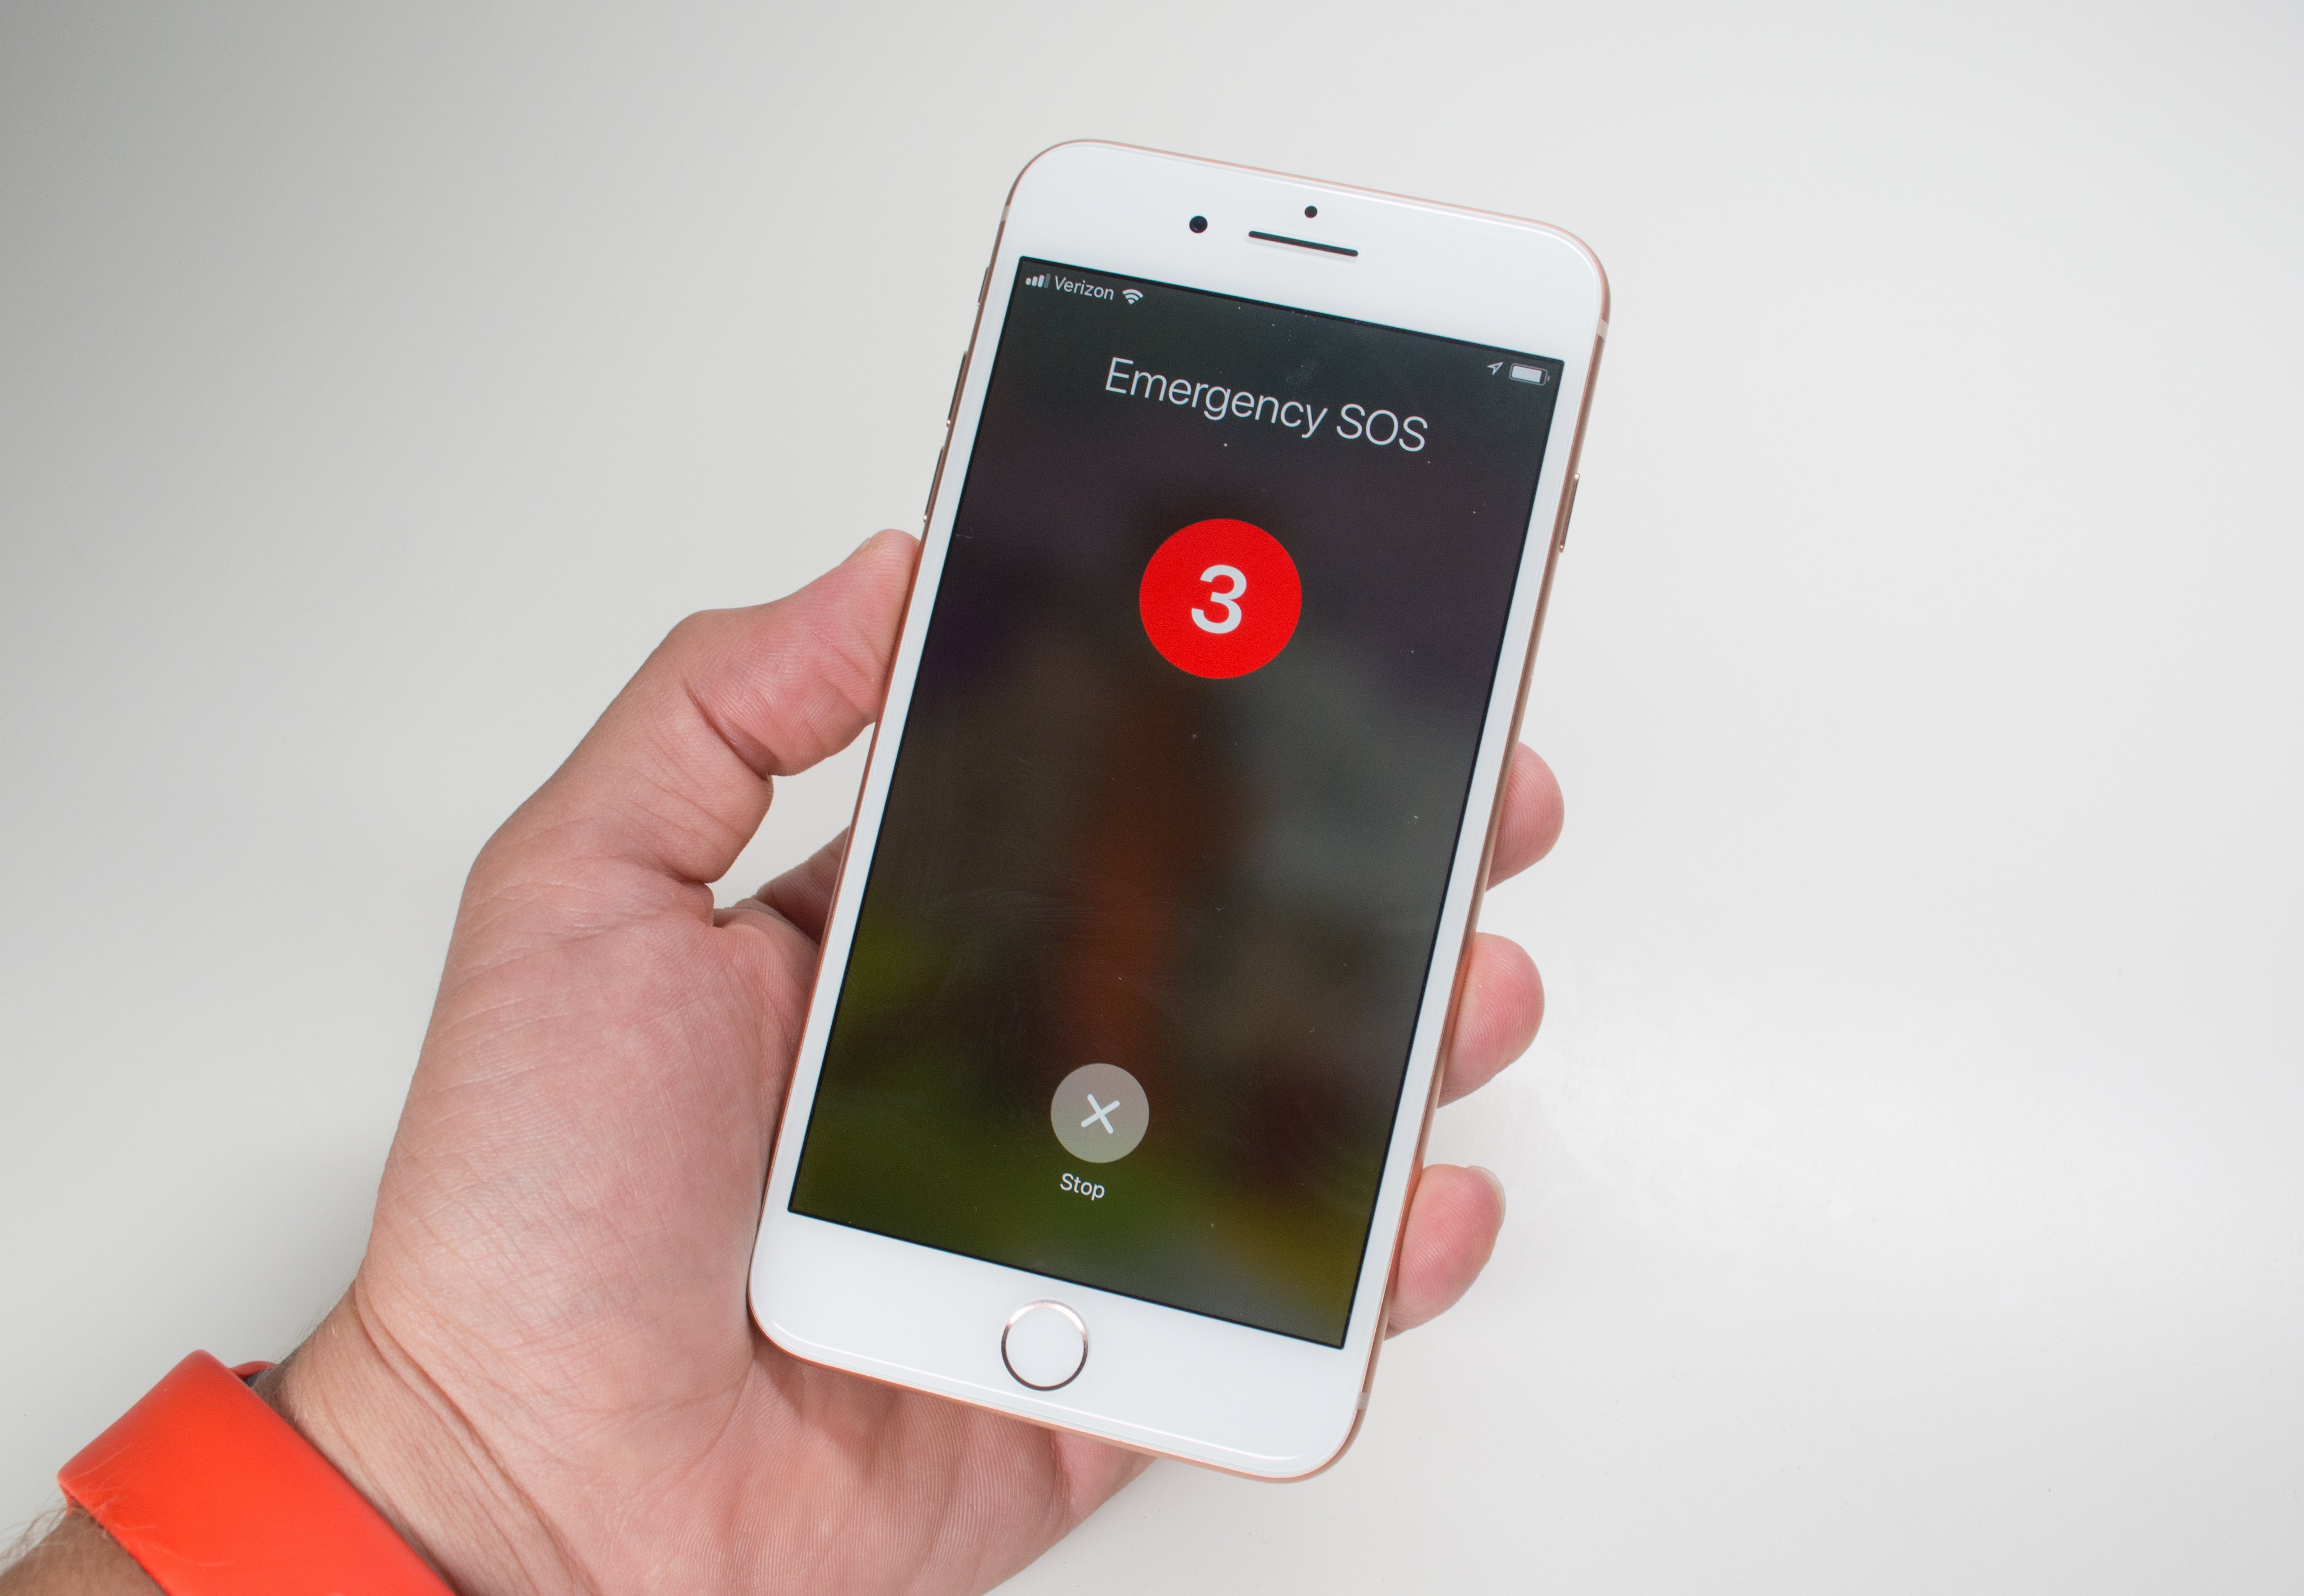 Here's what you need to know about using Emergency SOS to call 911 from your iPhone.